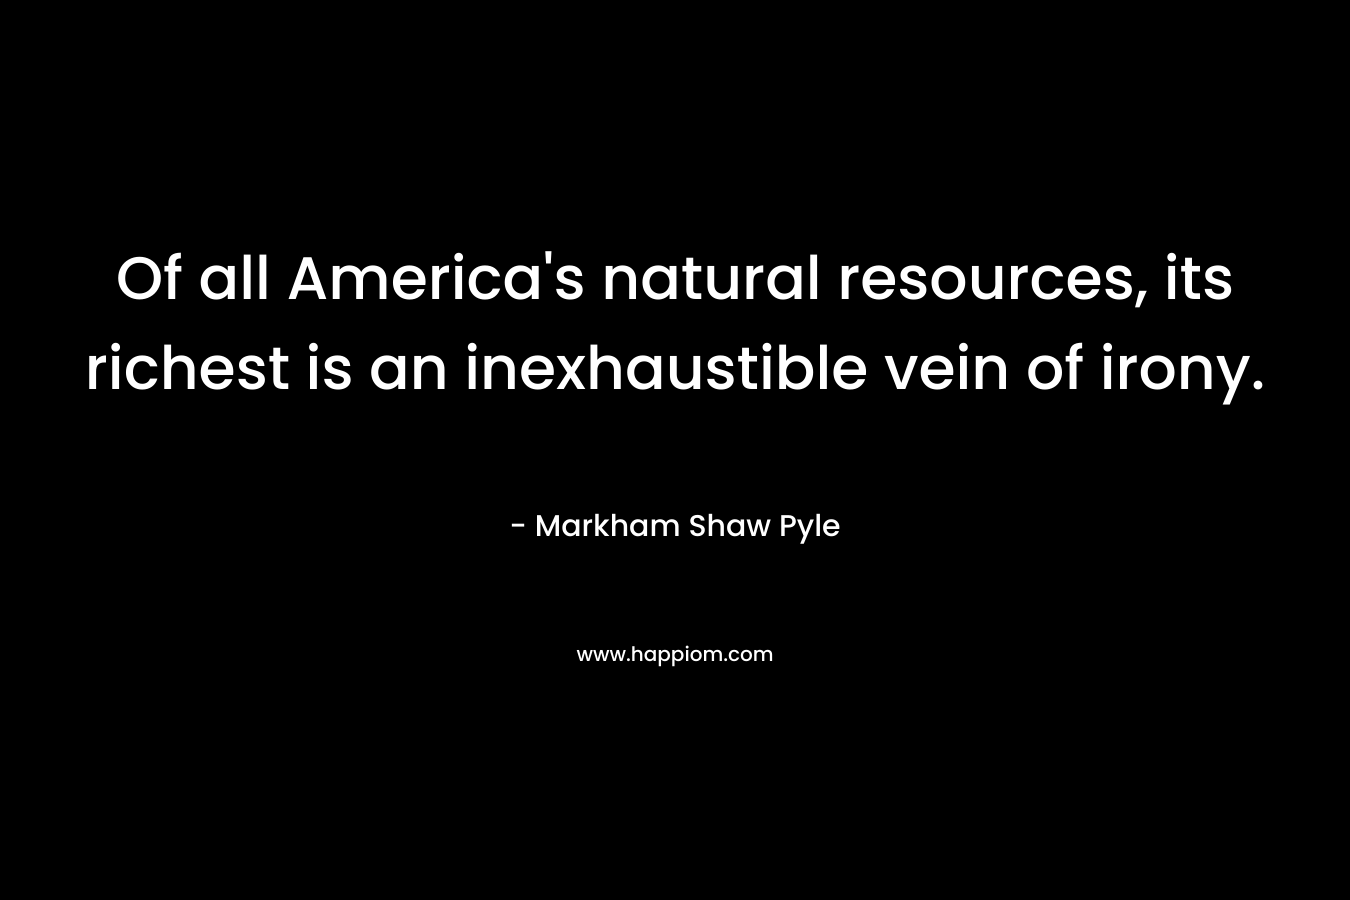 Of all America's natural resources, its richest is an inexhaustible vein of irony.